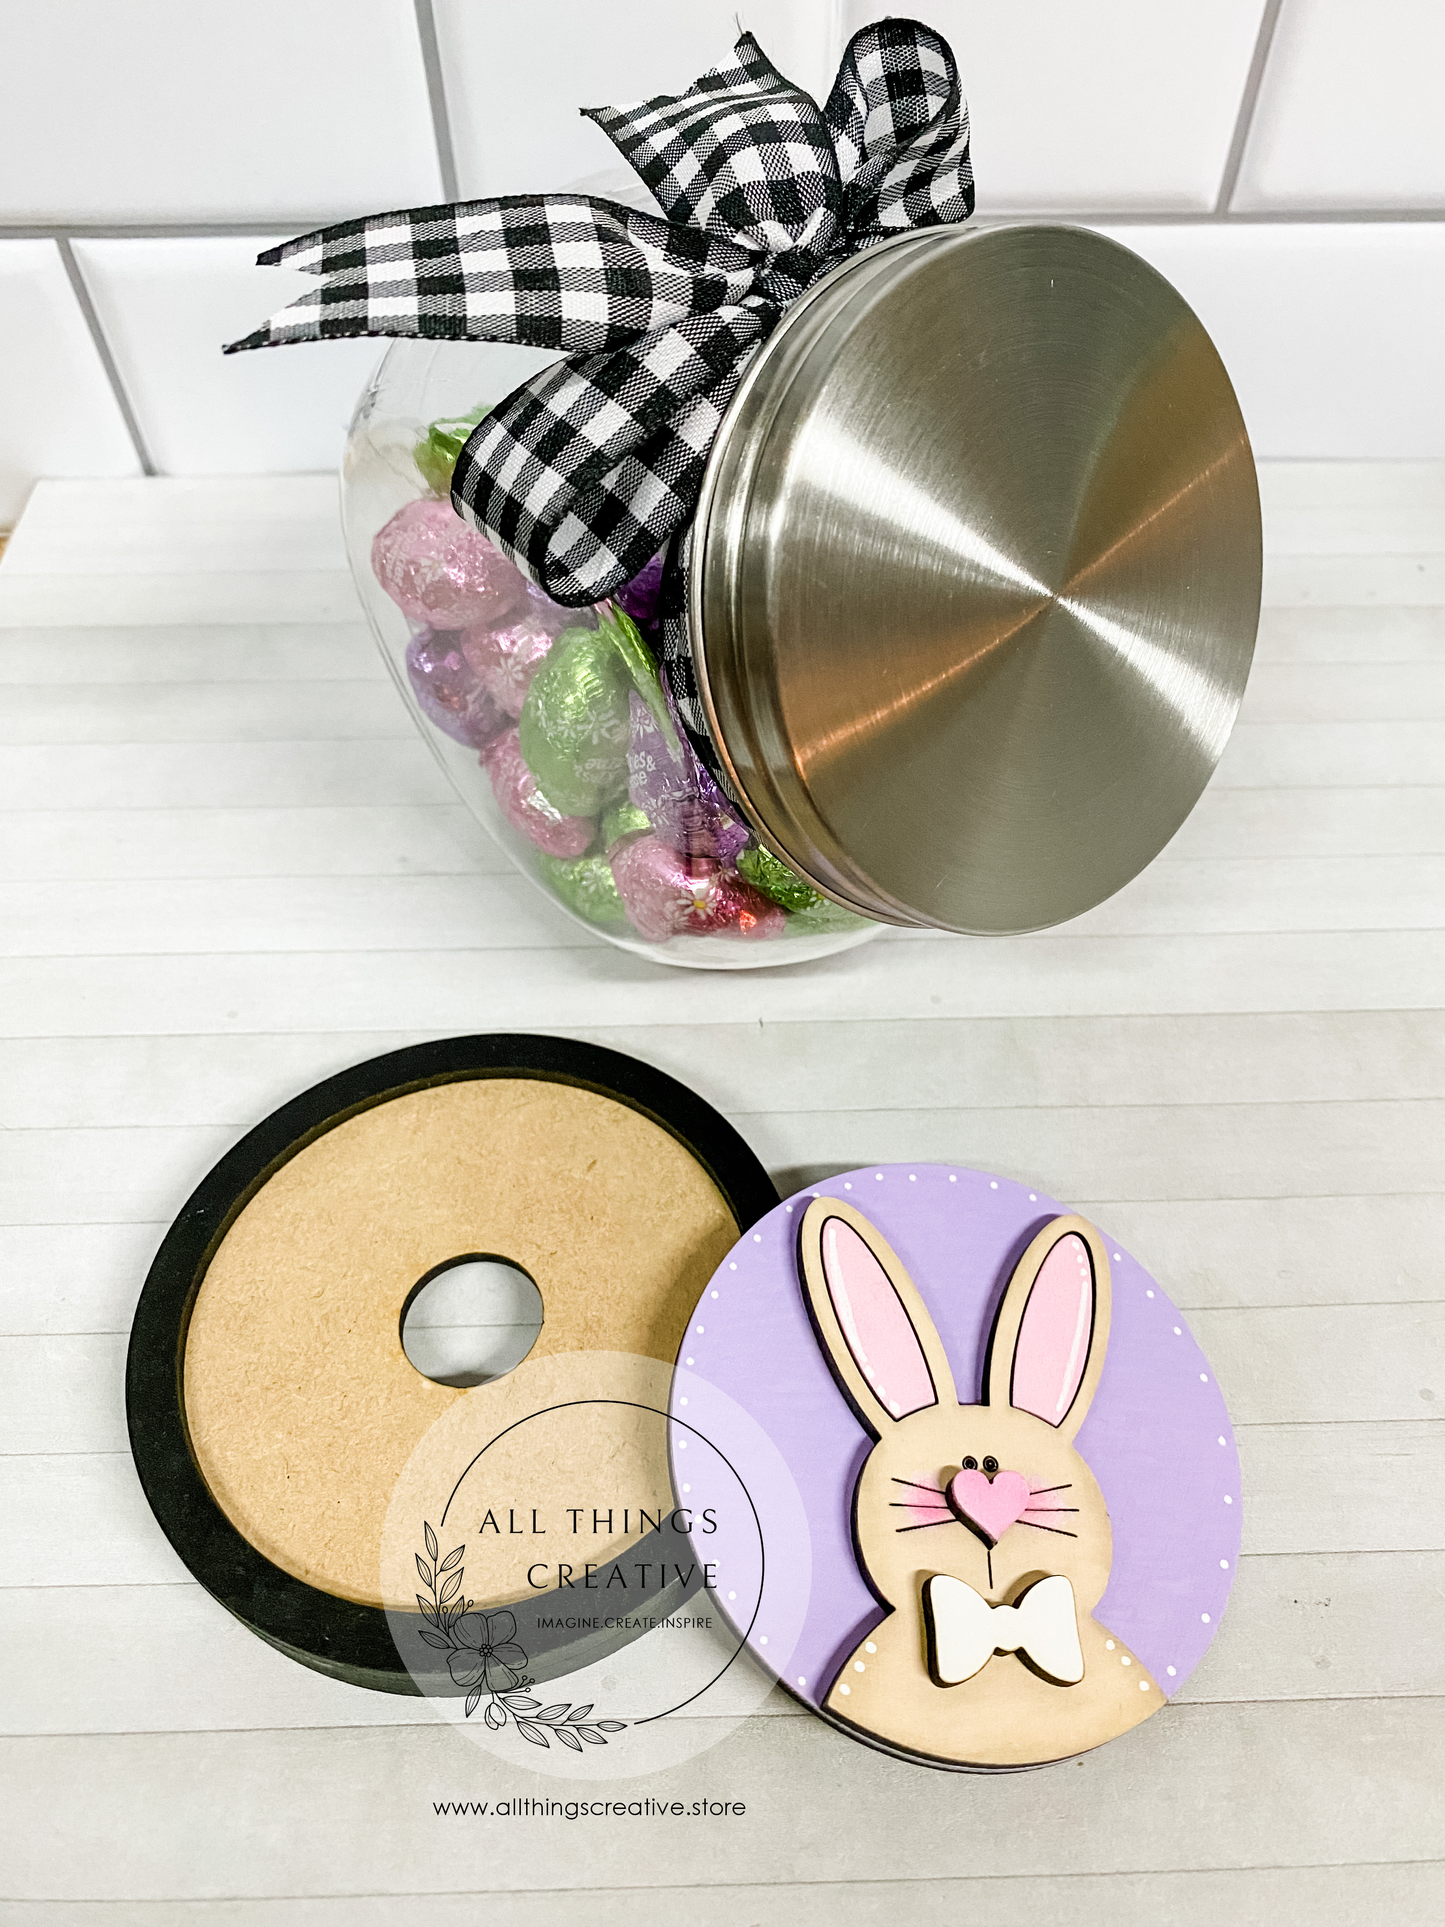 Glass Candy Jar Container with Removable Lid and a 3 inch Easter Bunny Interchangeable Circle Insert.